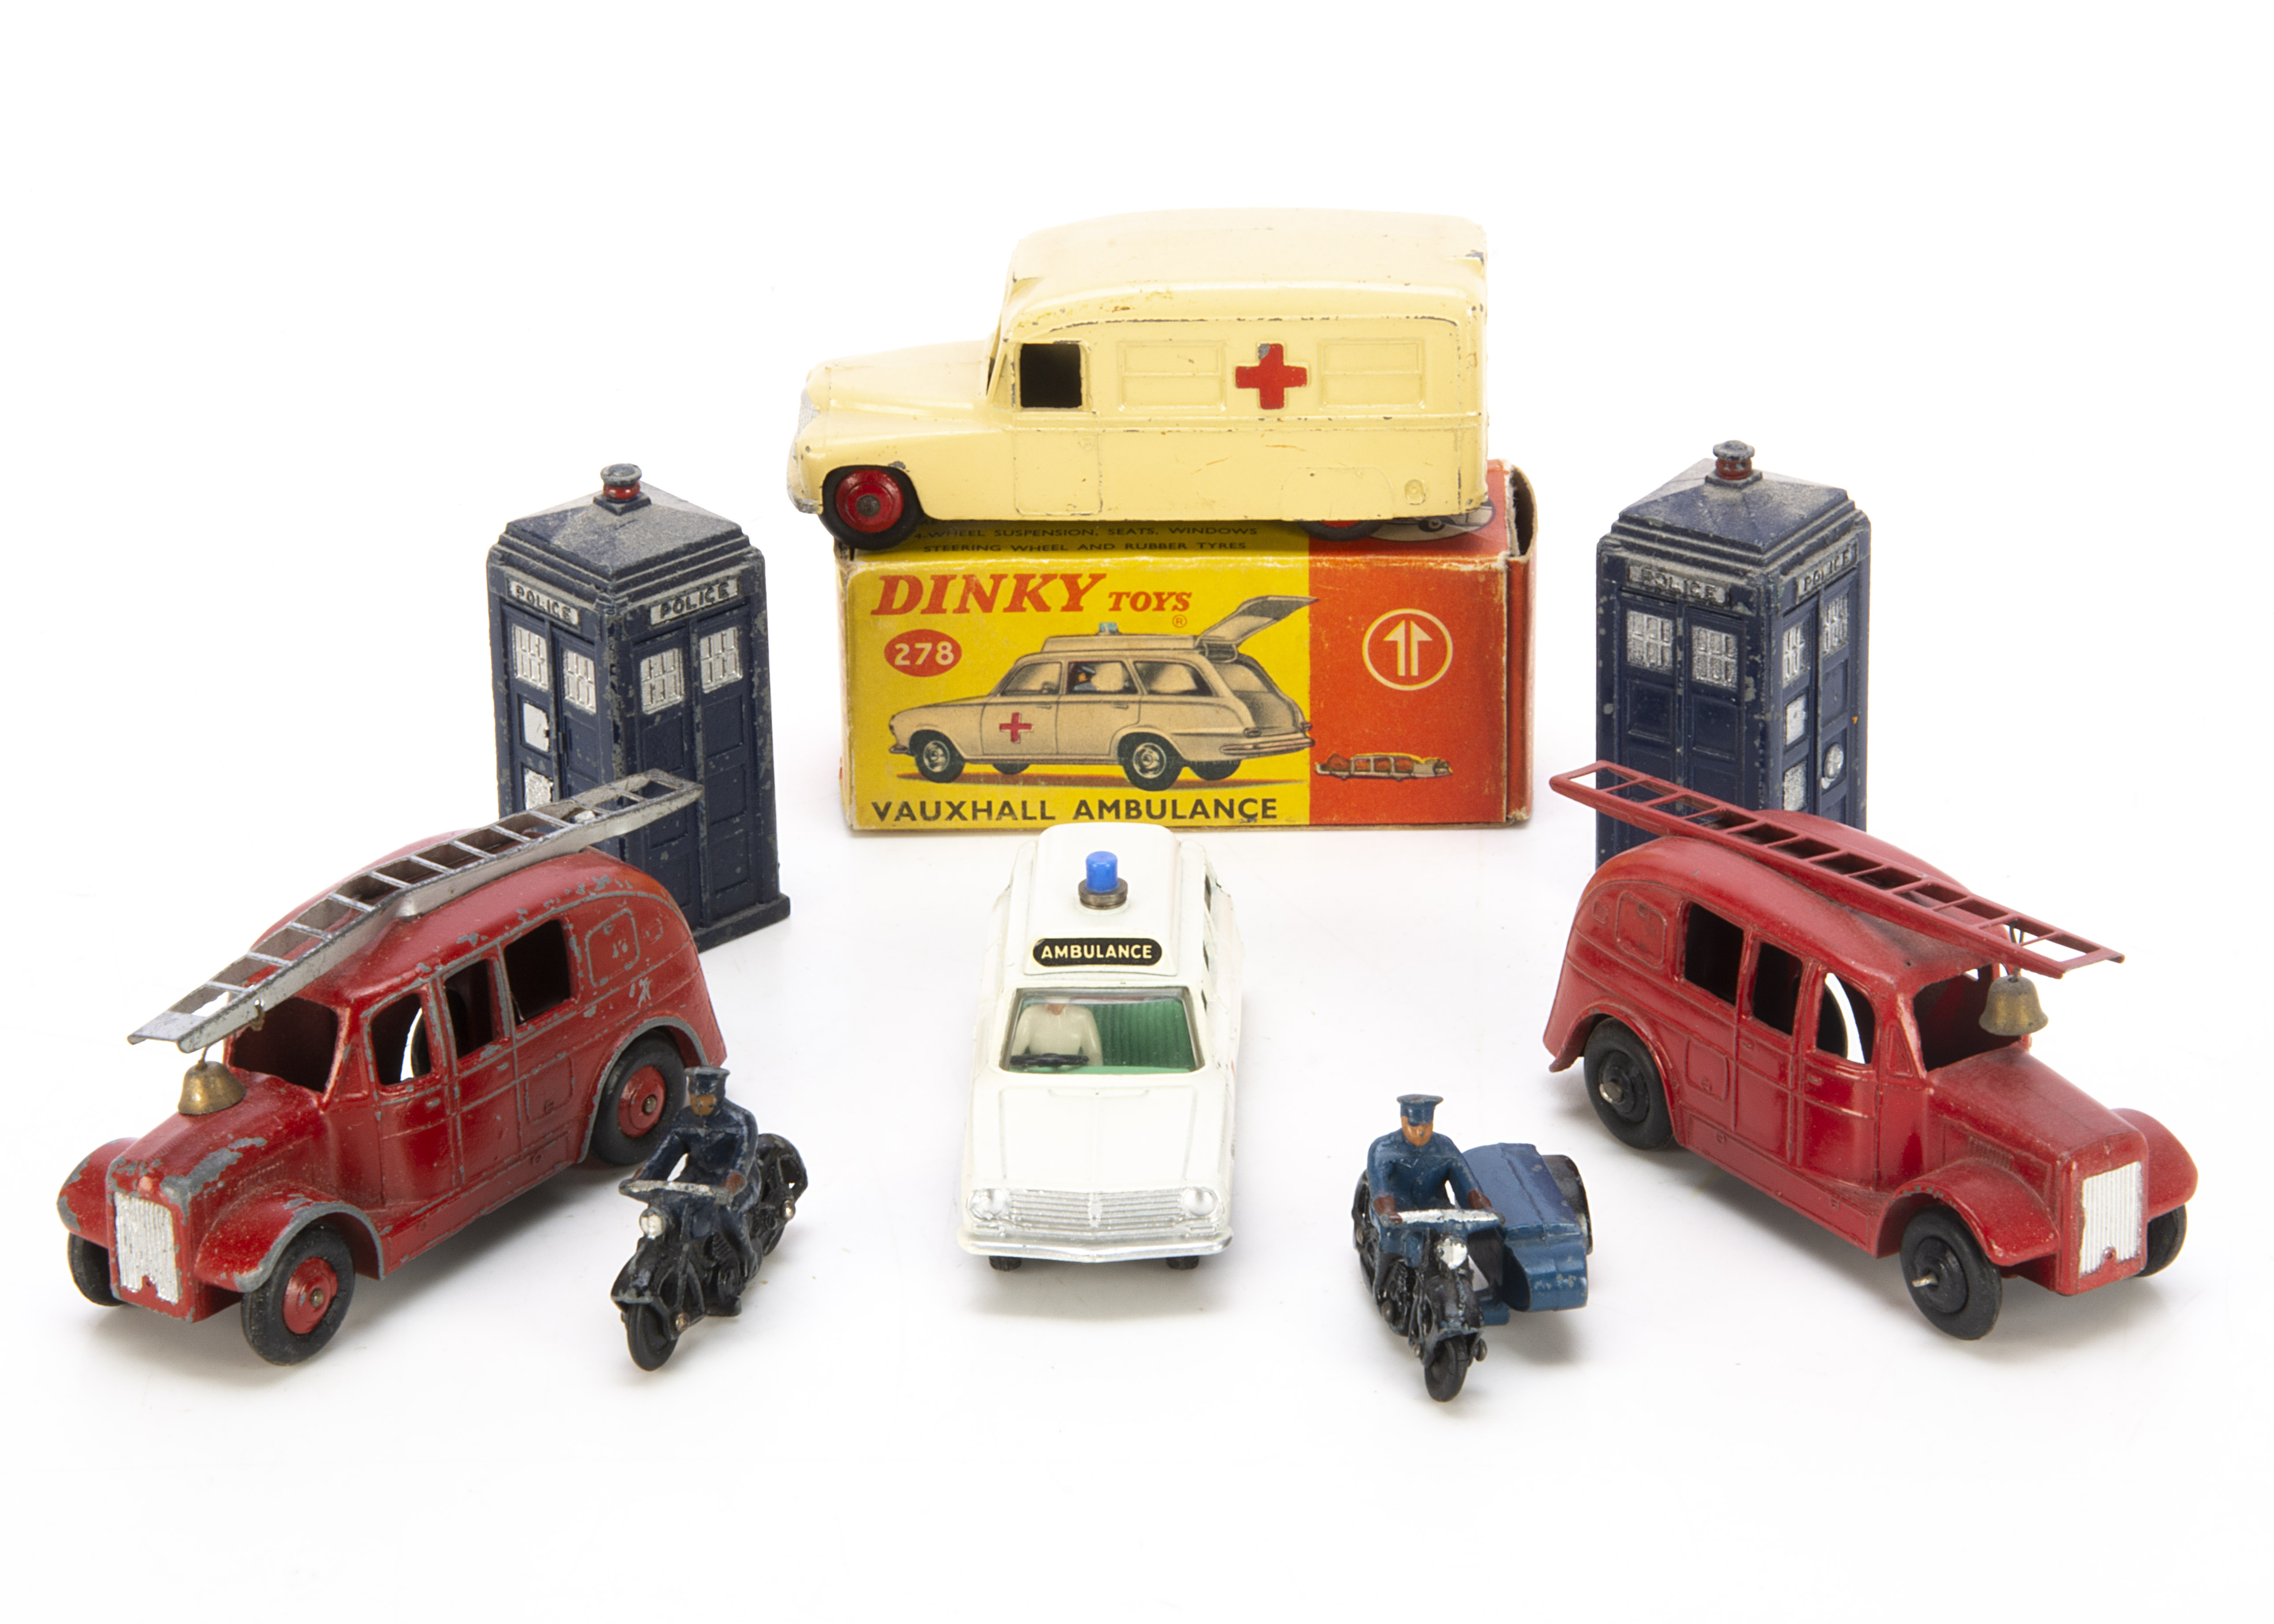 Dinky Toy Emergency Service Vehicles, 278 Vauxhall Ambulance, with patient, in original box, loose